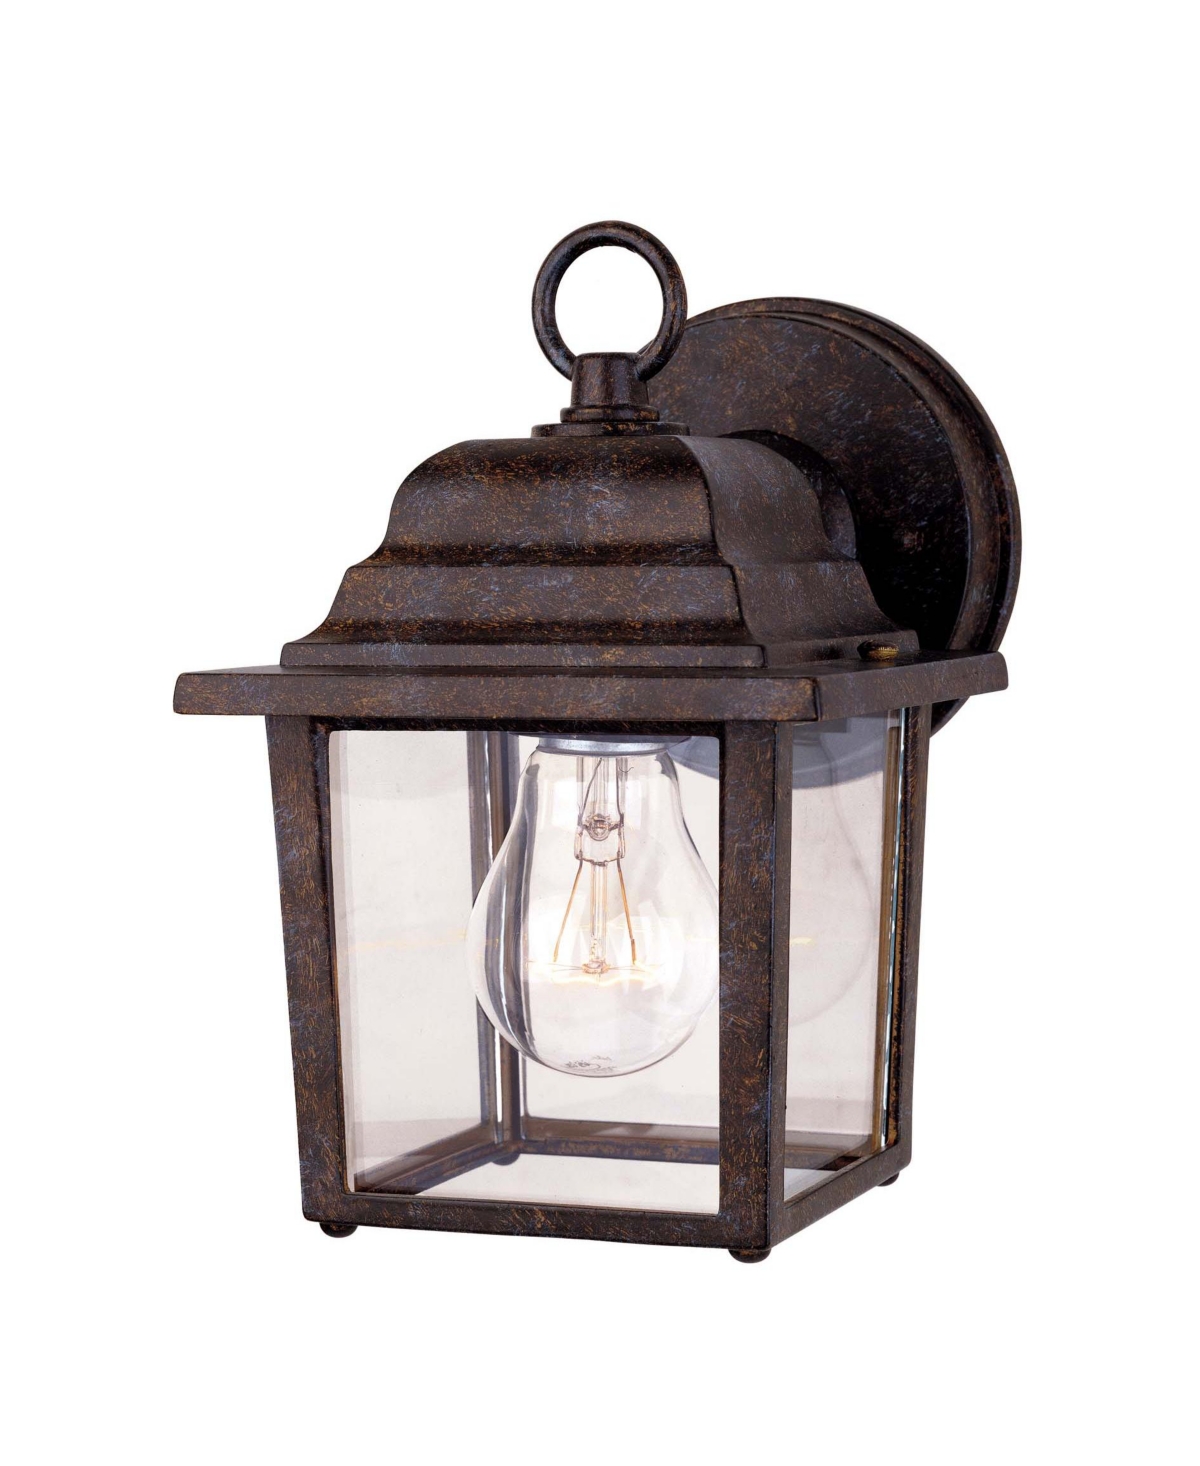 Exterior Collections 9" Wall Lantern - Rustic bronze